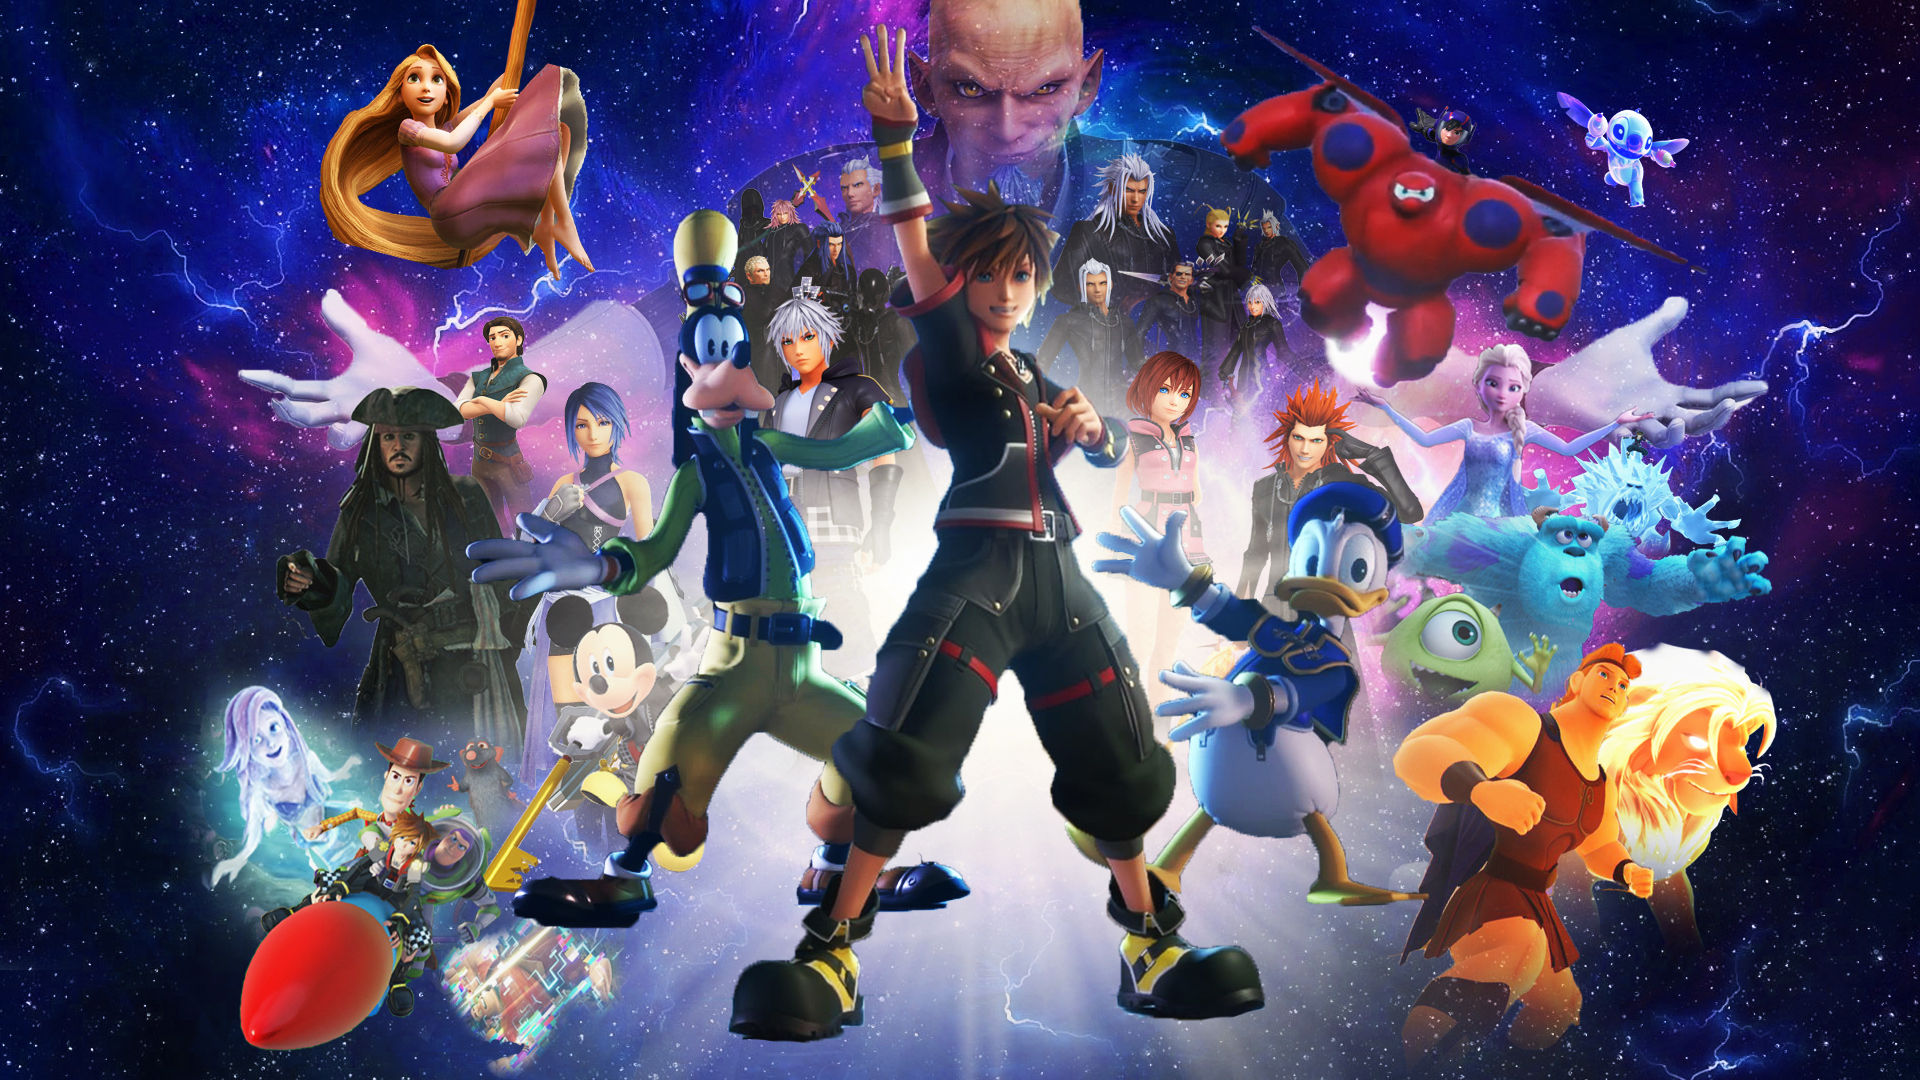 Kingdom Hearts wallpapers for PC and mobile | Pocket Tactics